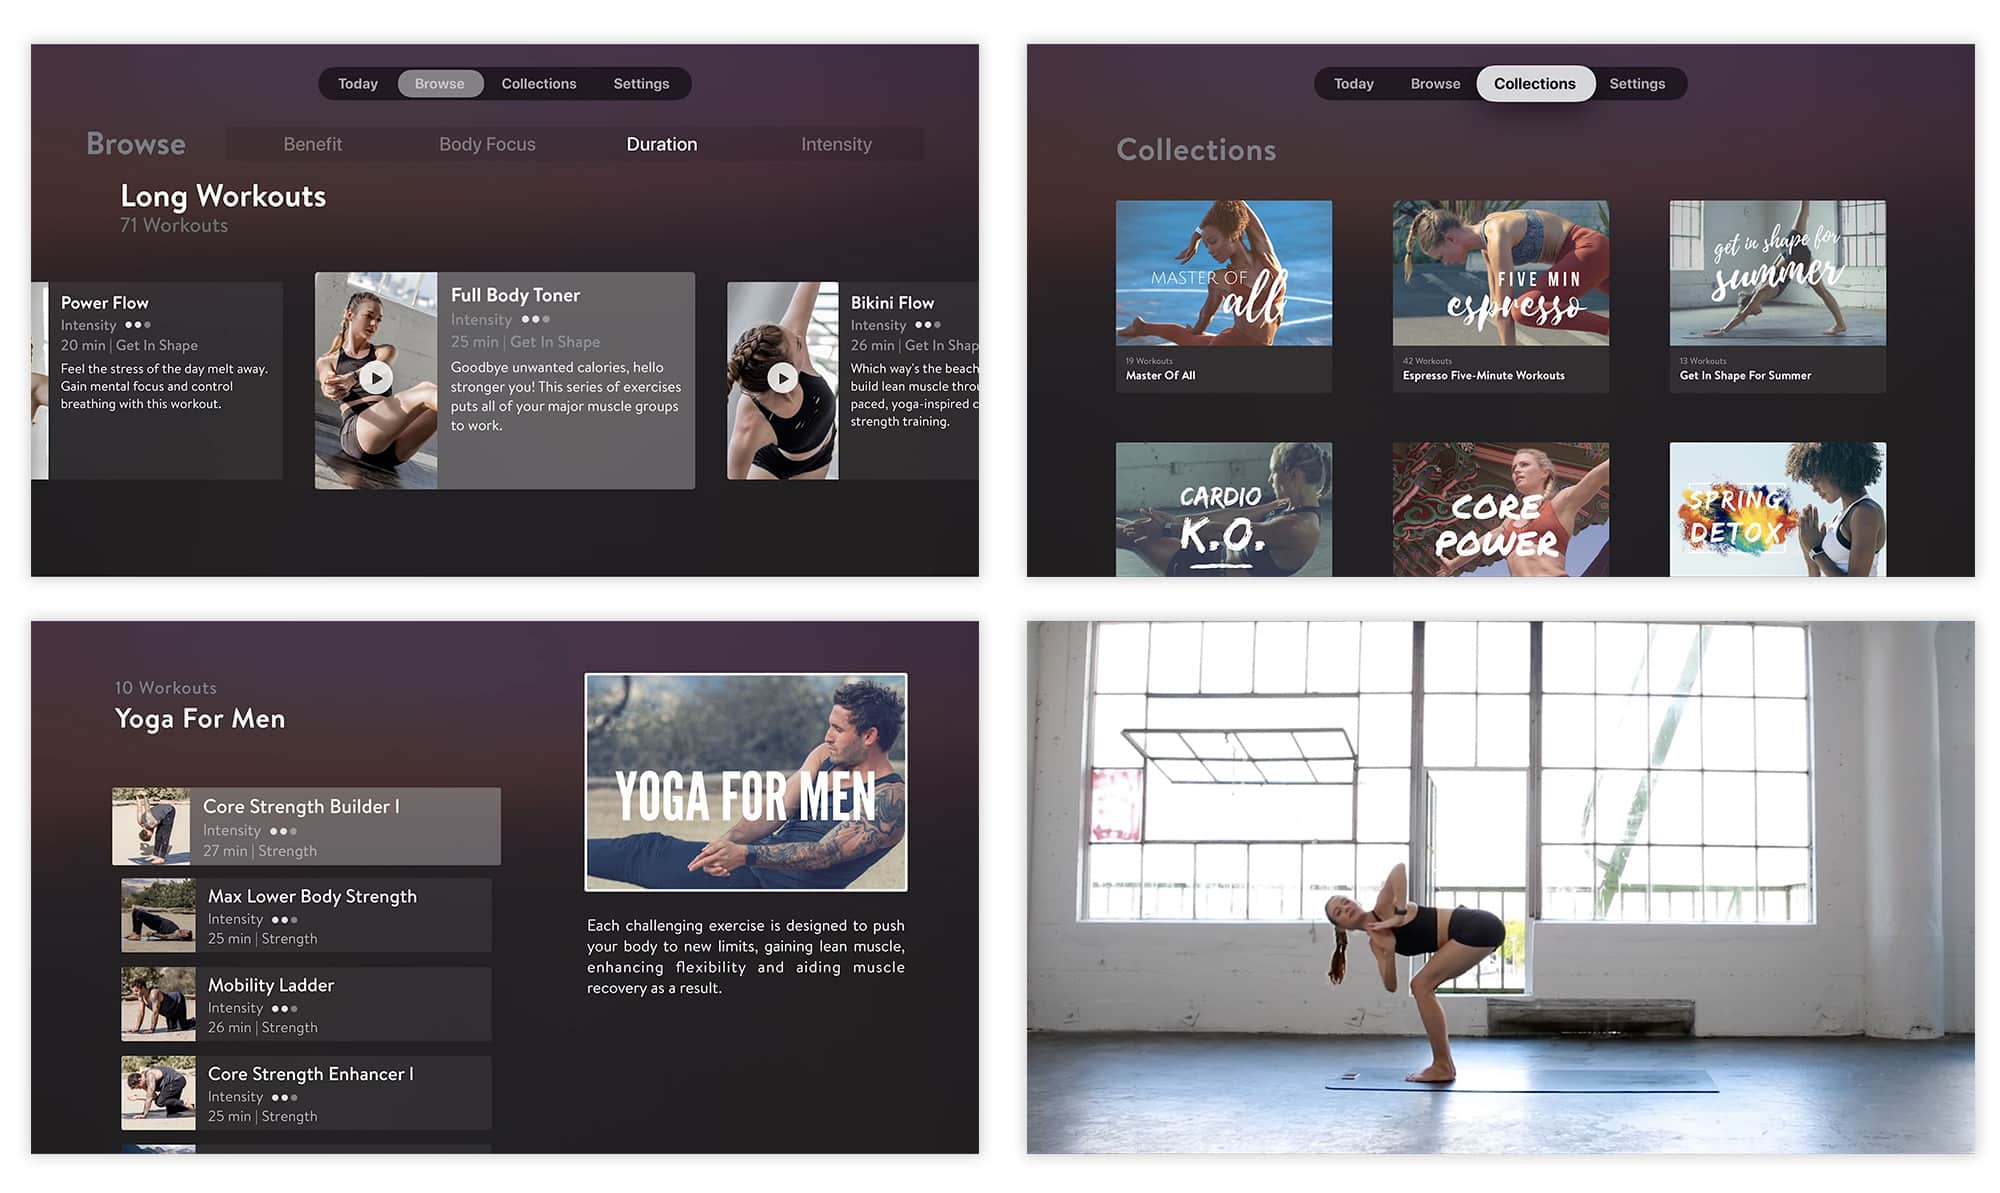 Asana Rebel offers a sumptuous range of workout videos.